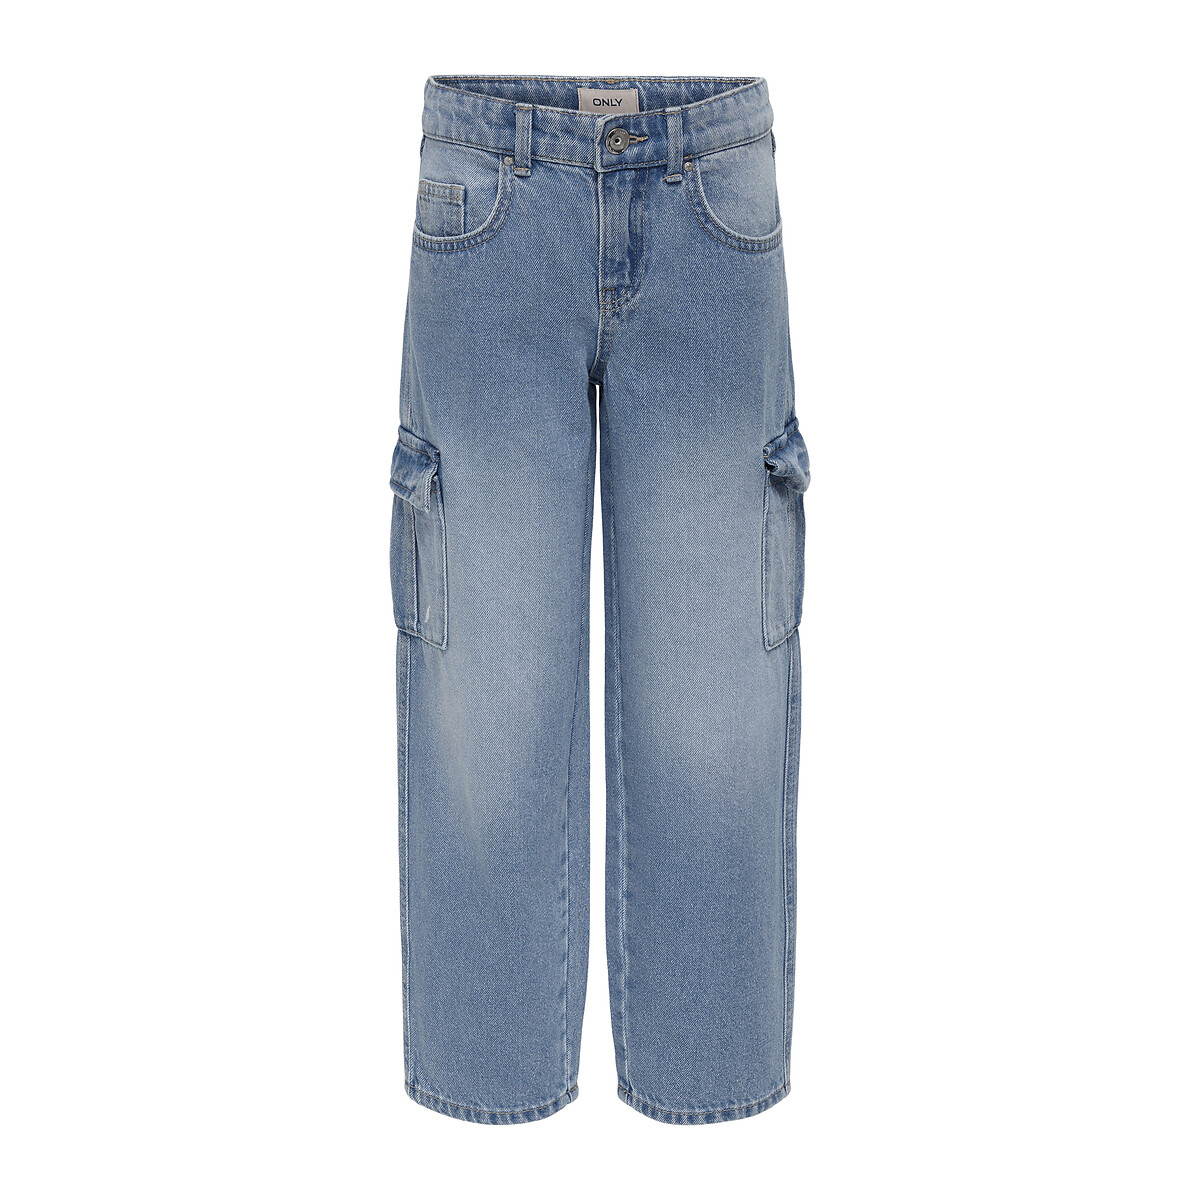 Wide Leg Jeans in Mid Rise